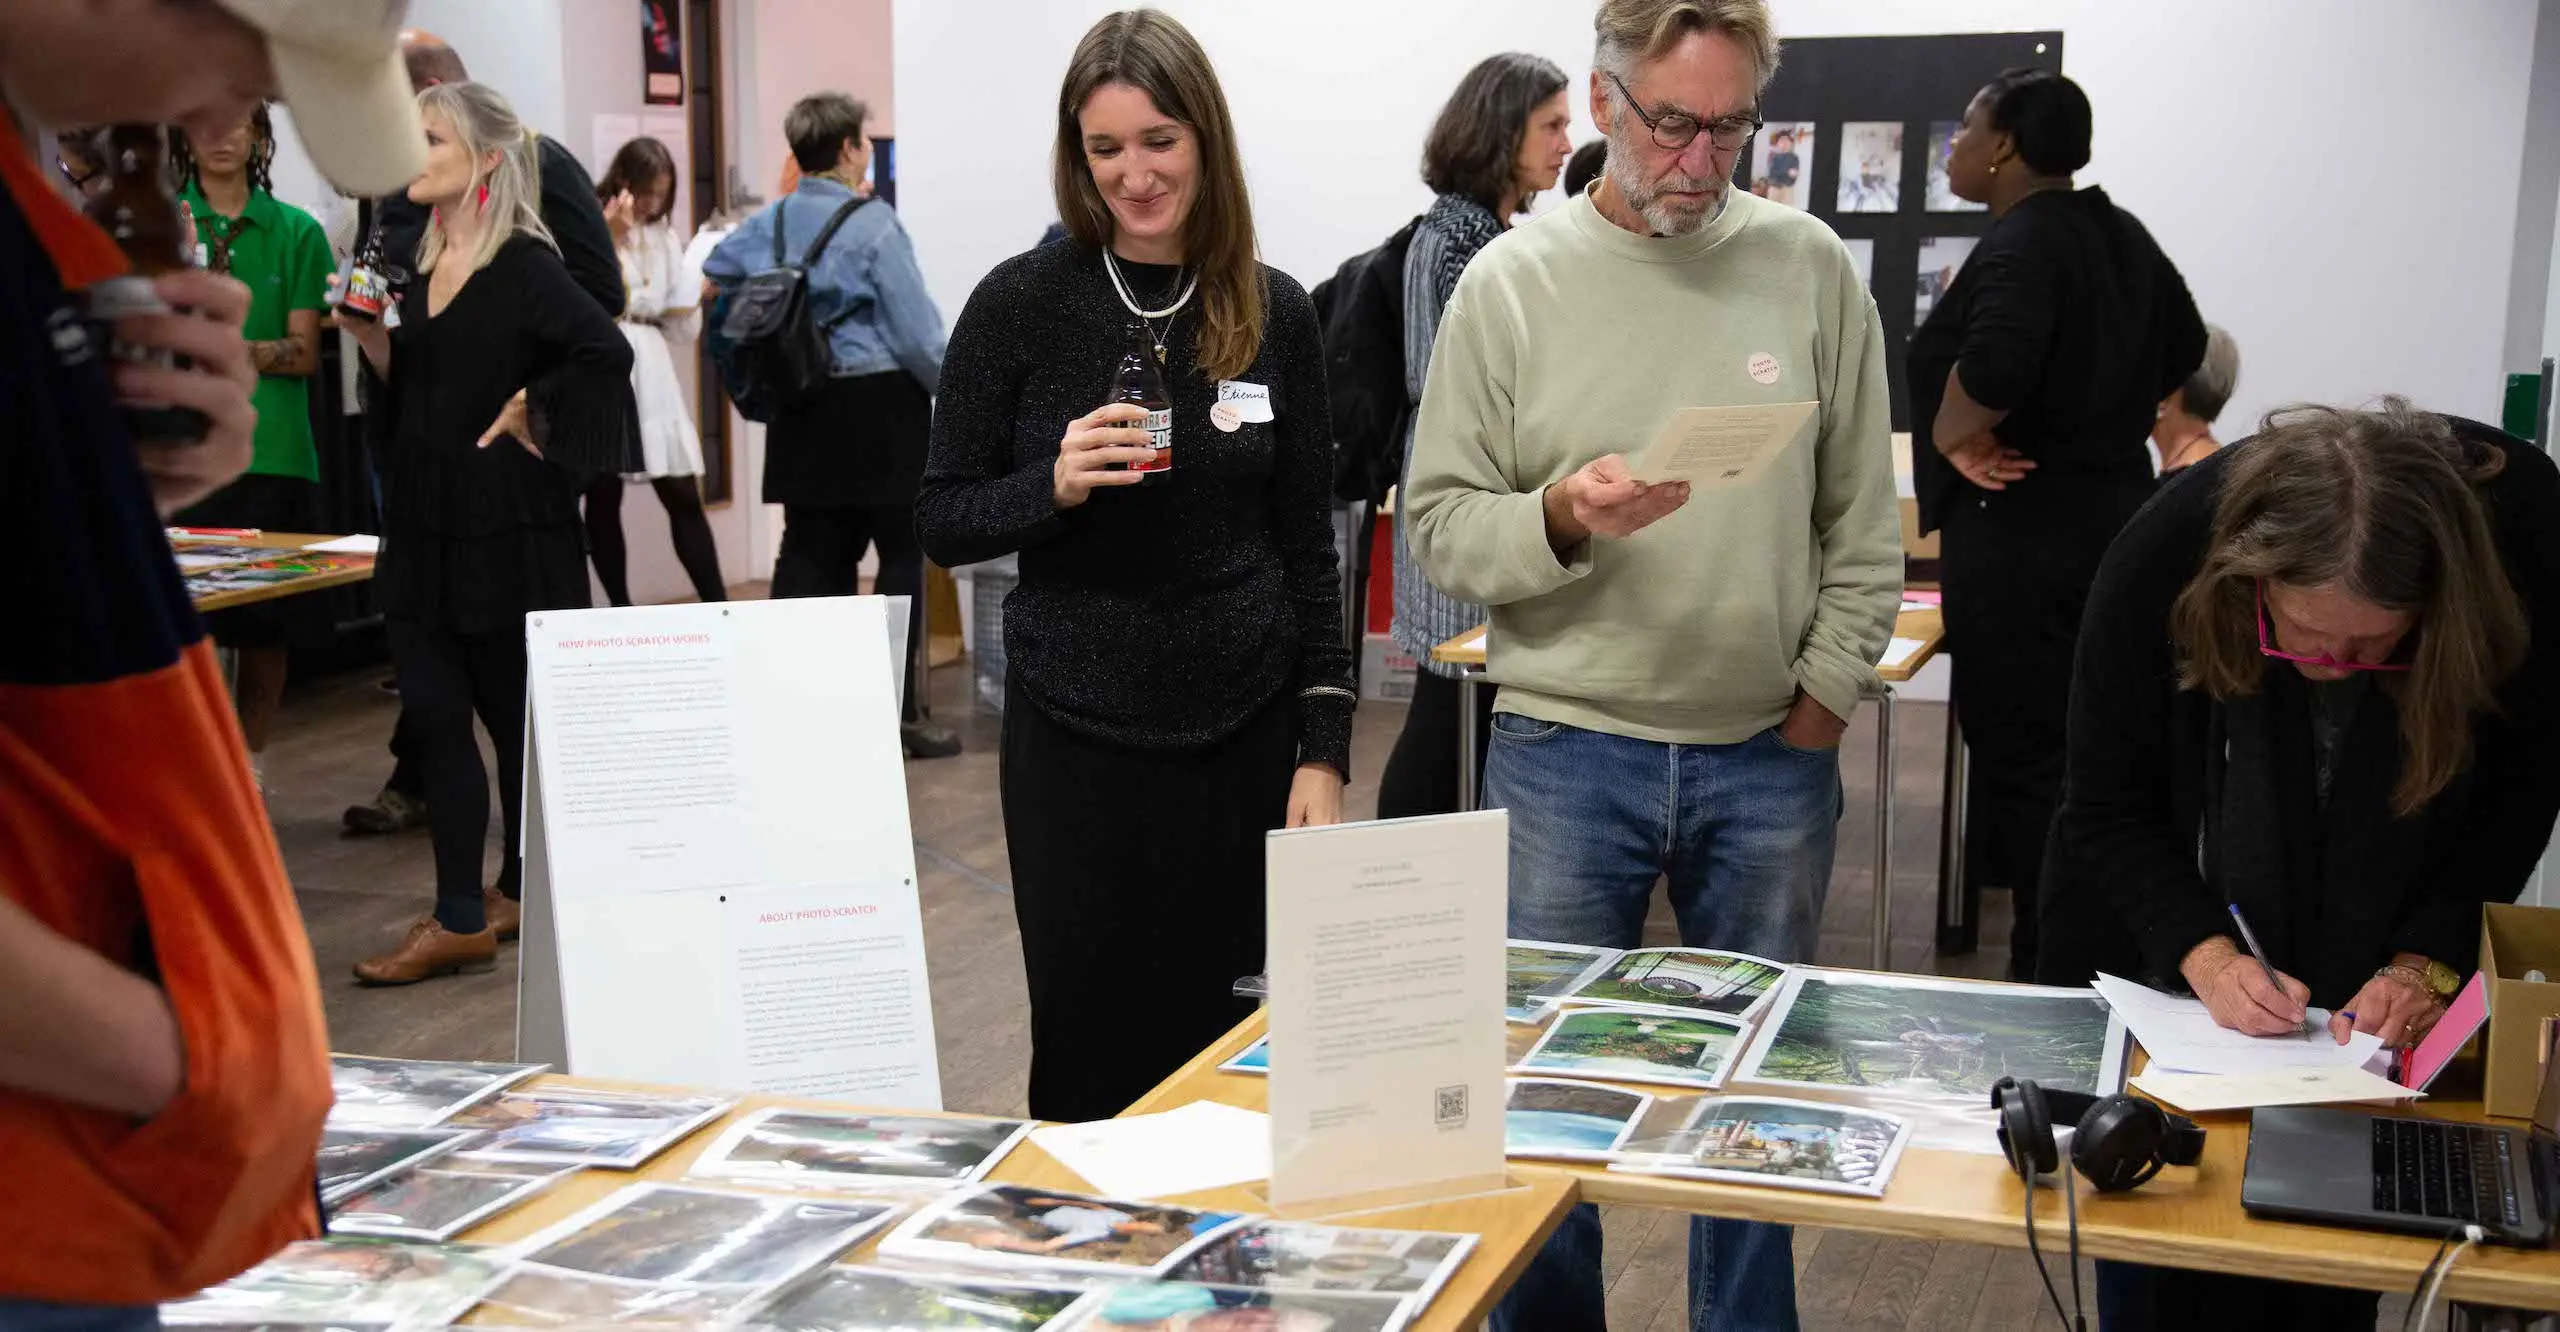 Photo of small groups of people standing around different tables with photographs on them.